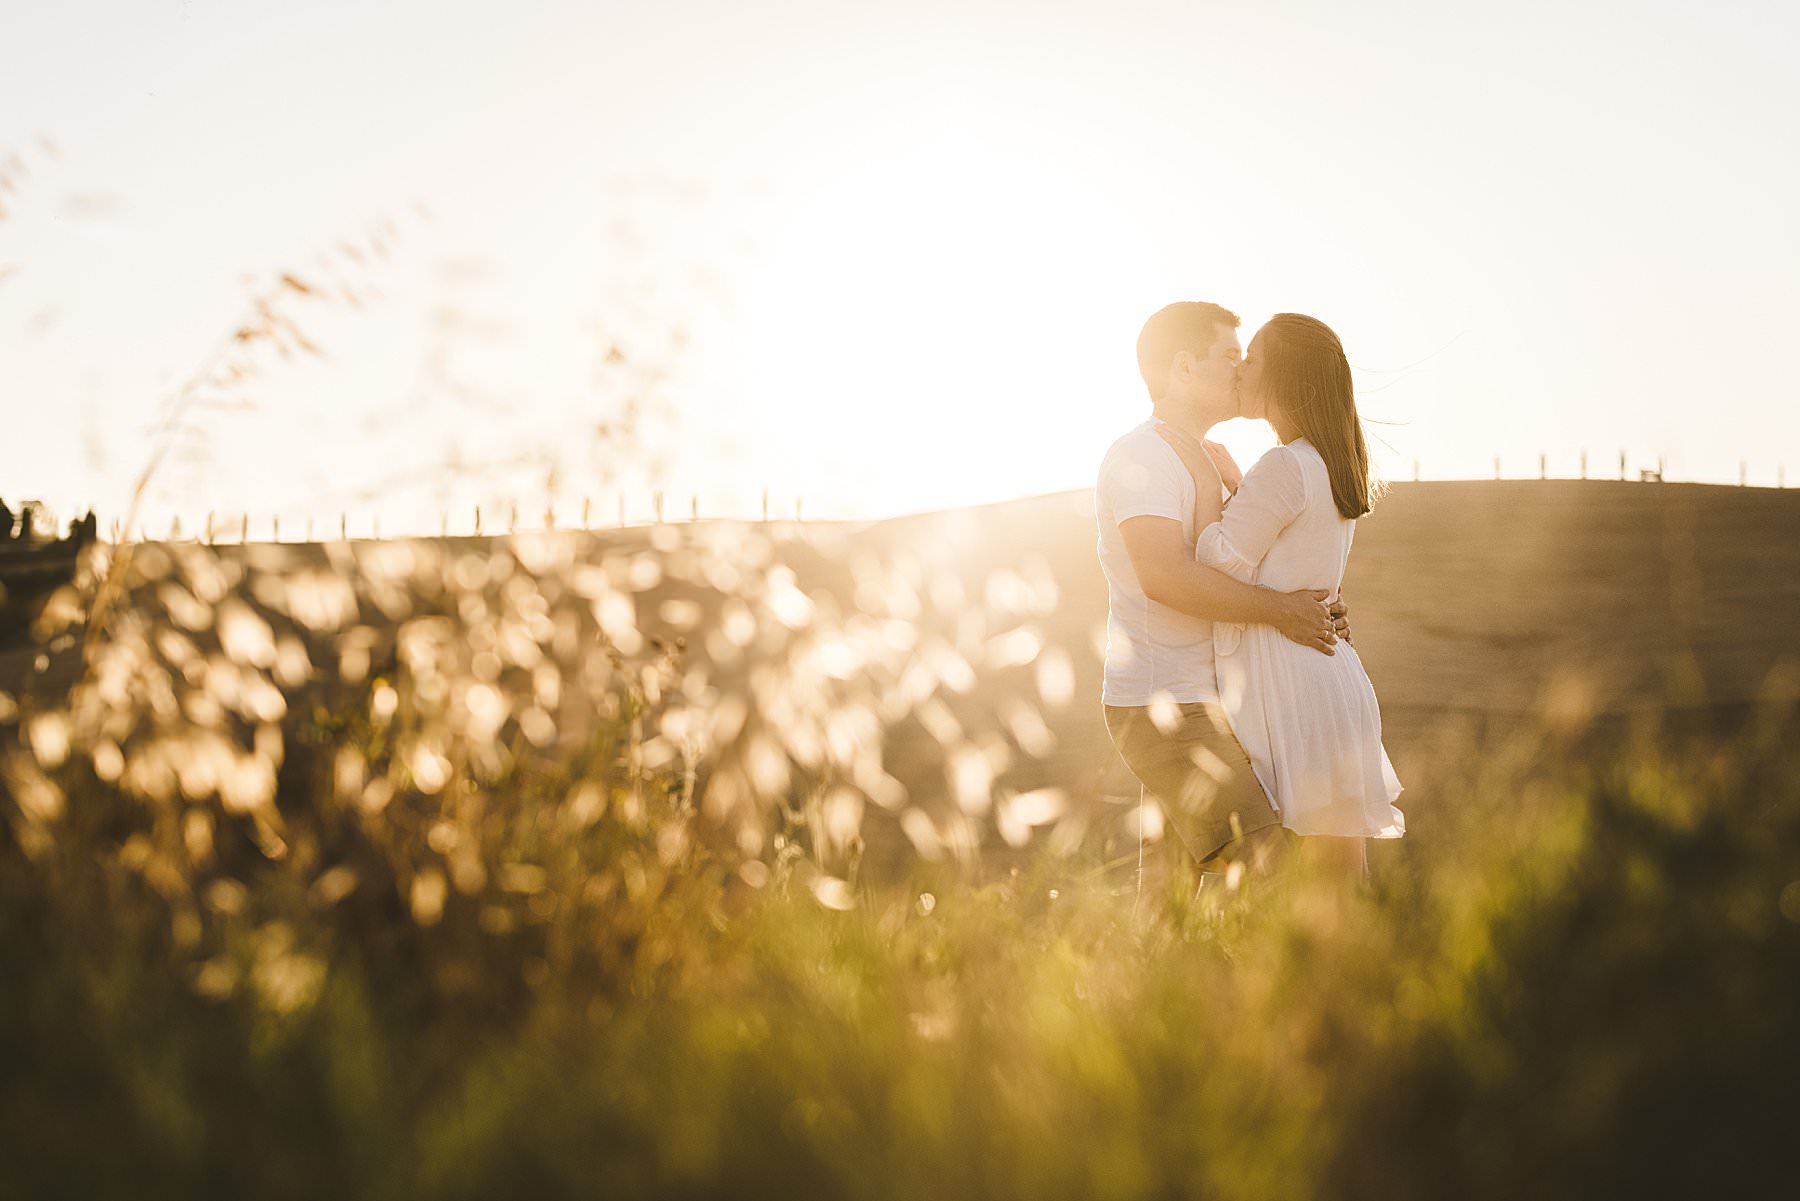 Anke and Marco were dreaming of being the protagonists of charming Tuscan countryside photos